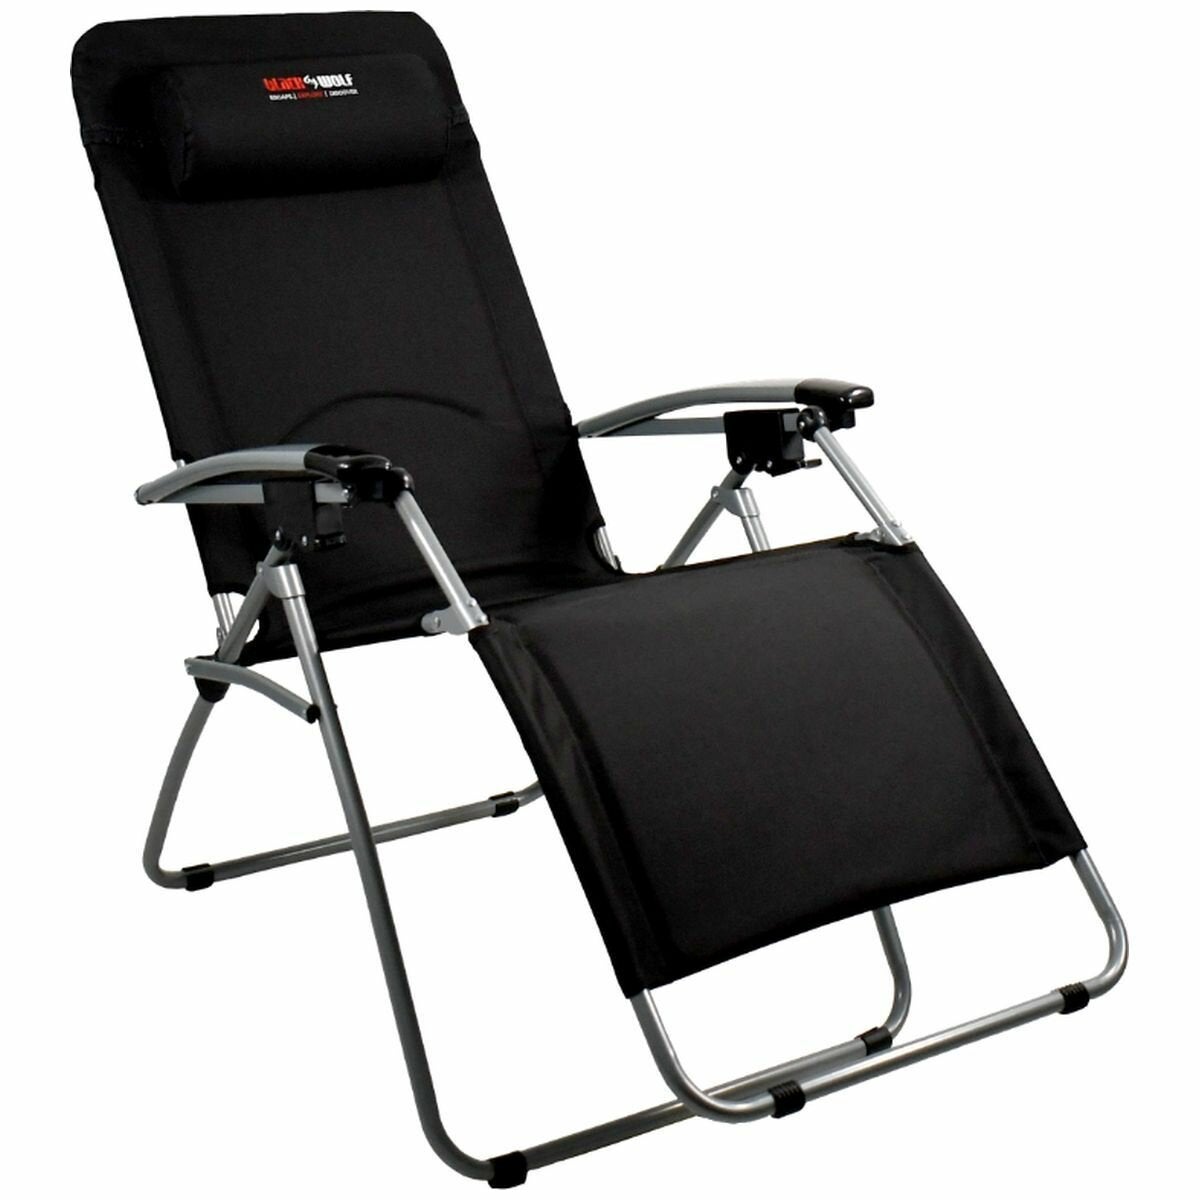 Image of BlackWolf Reclining Lounger Chair Black 32S000211381000